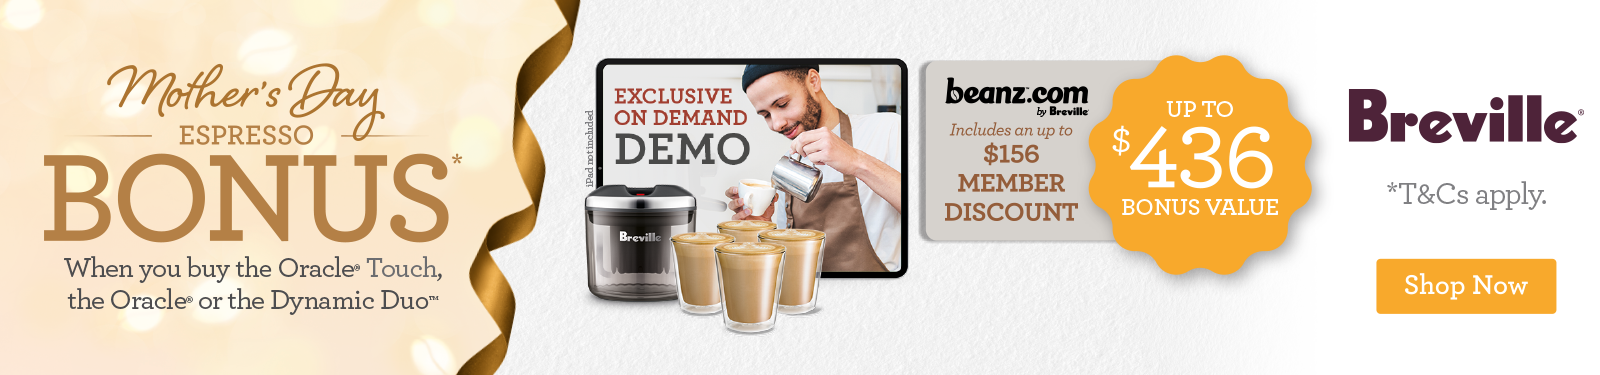 Bonus Barista Pack On Selected Breville Coffee Machines at Retravision